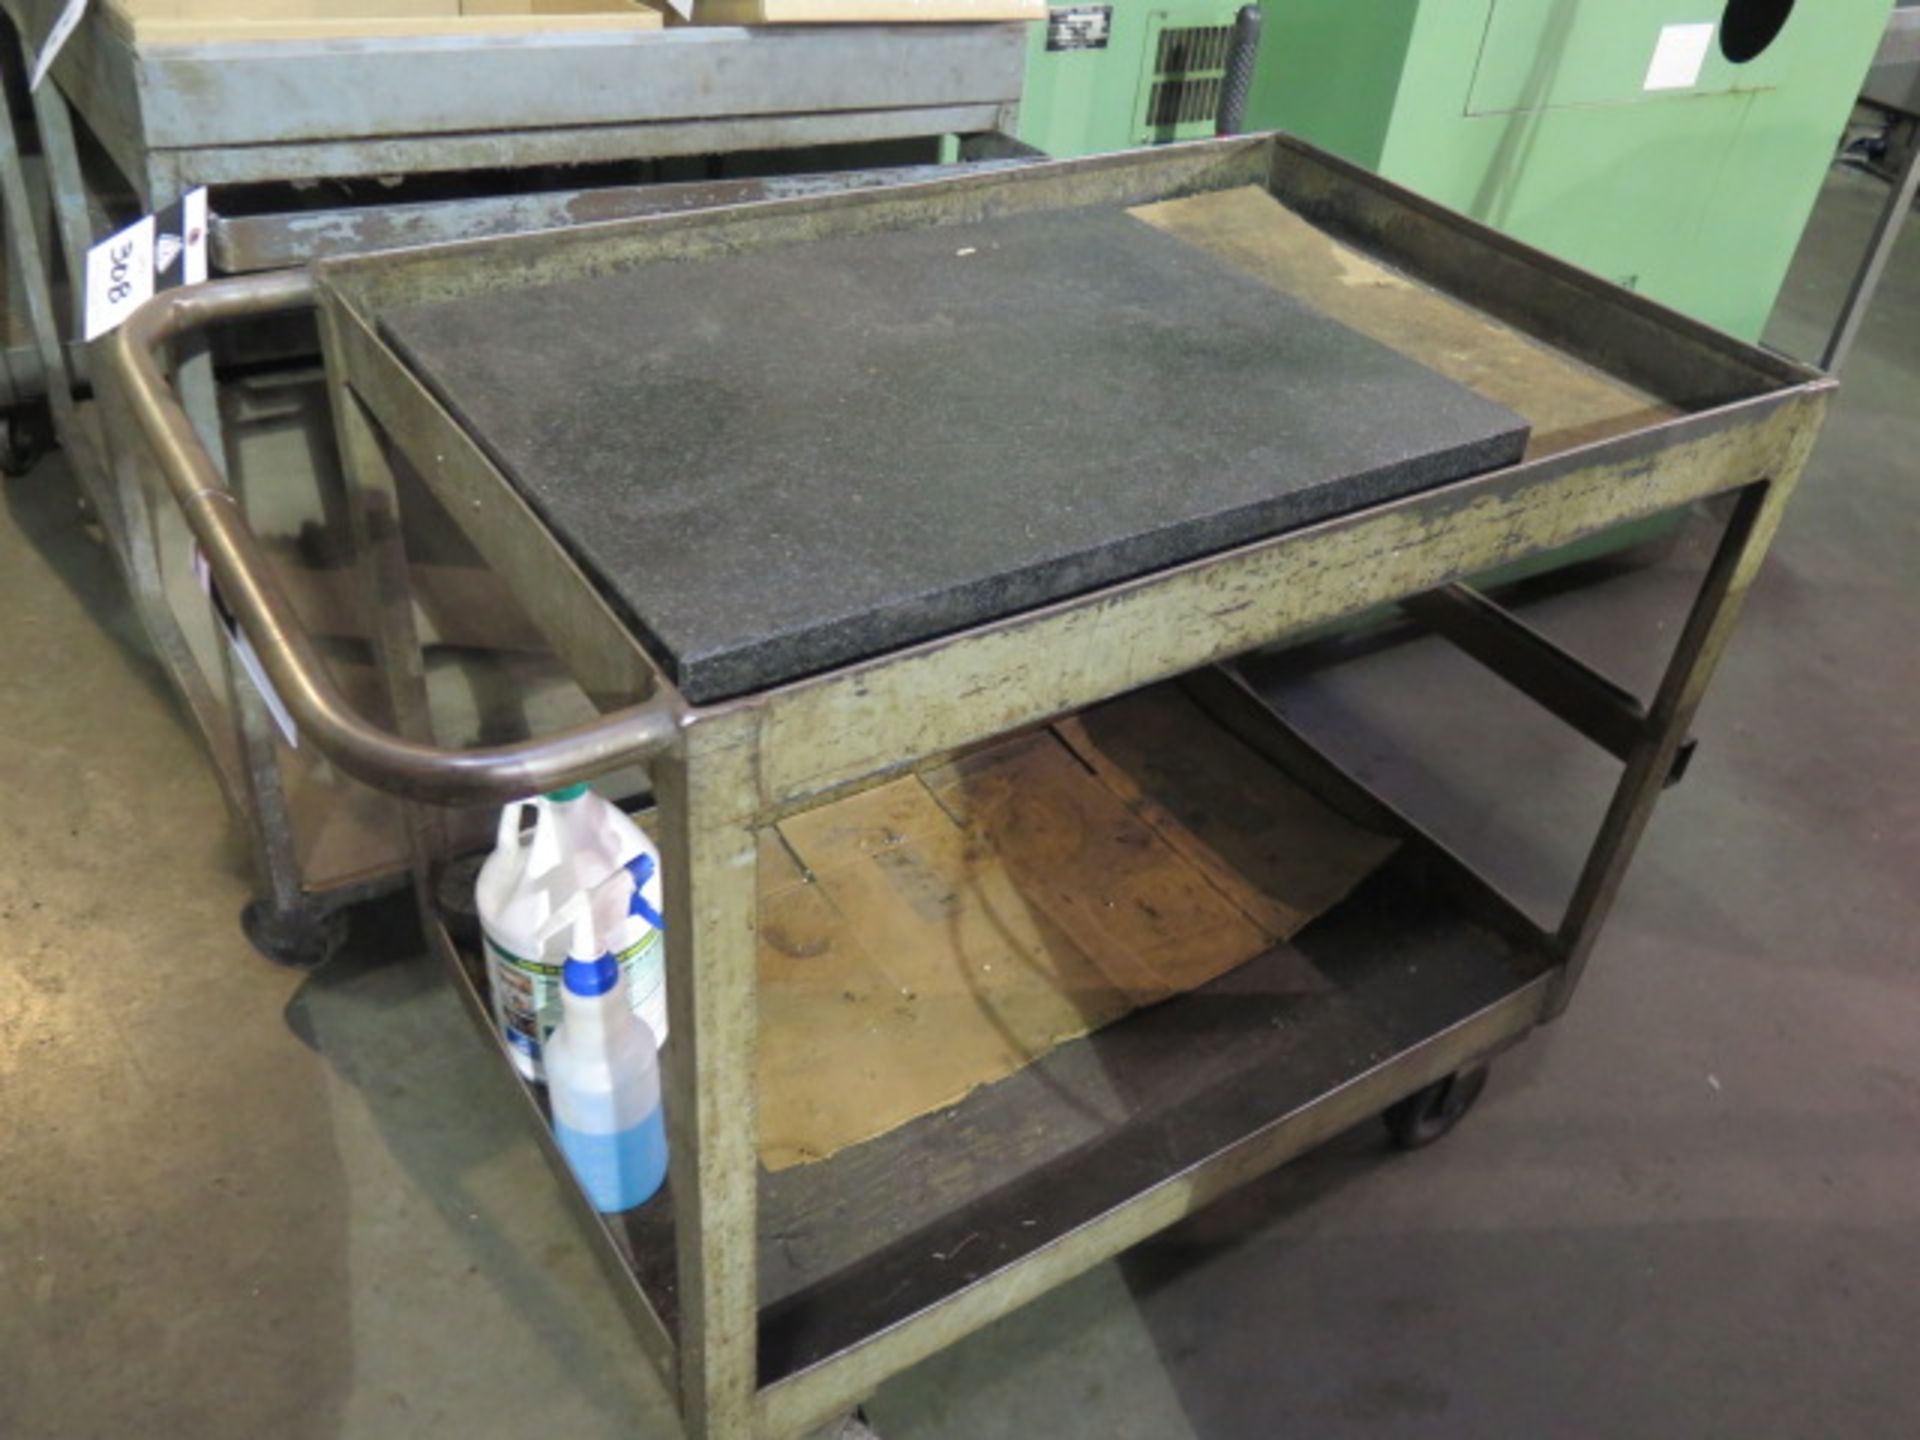 18" x 24" x 3" Granite Surface Plate w/ Cart (SOLD AS-IS - NO WARRANTY)